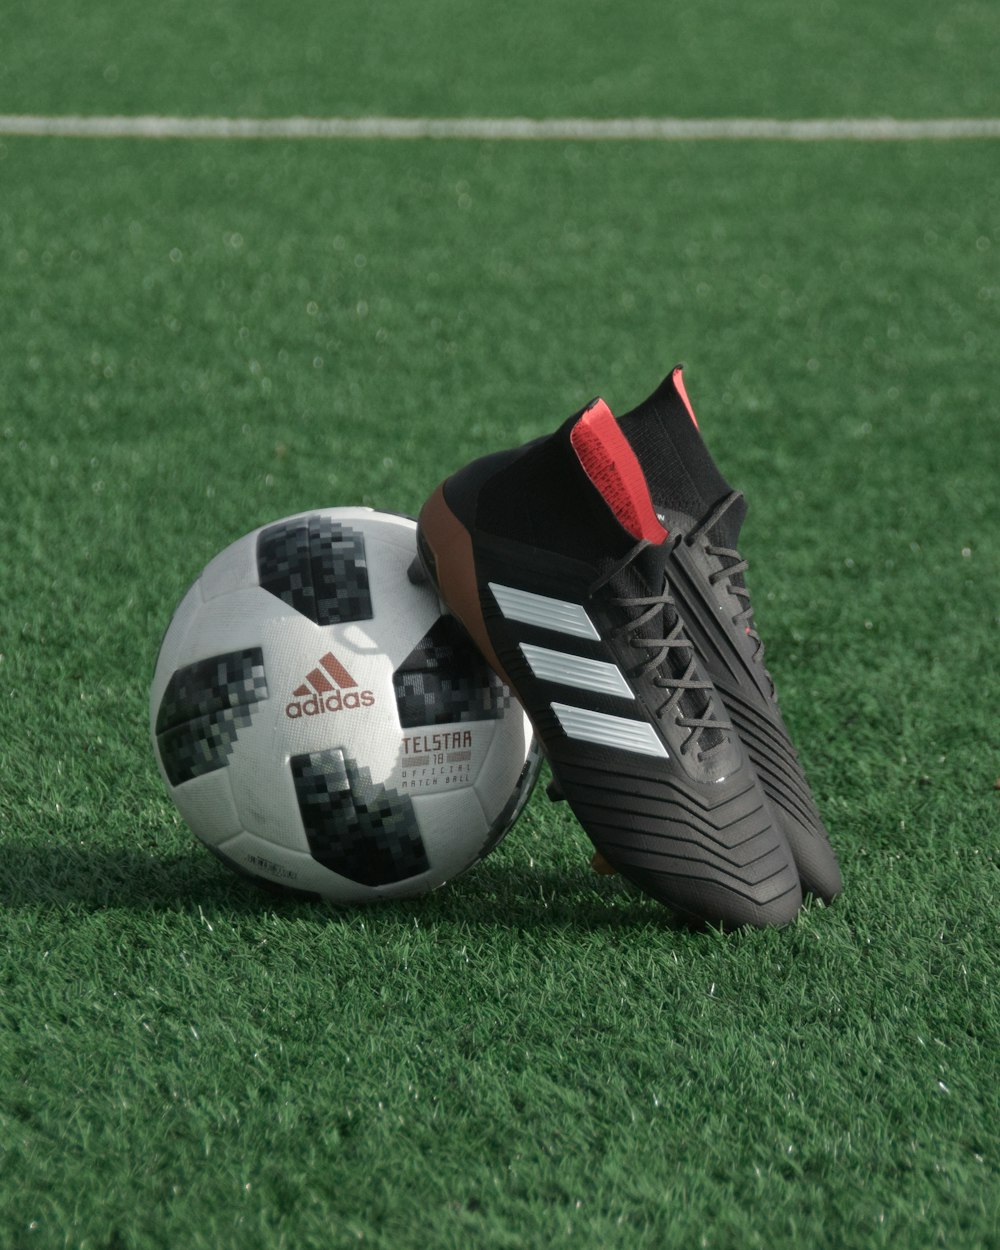 Black adidas cleats lean on white and black adidas soccer ball on green  grass photo – Free Green Image on Unsplash